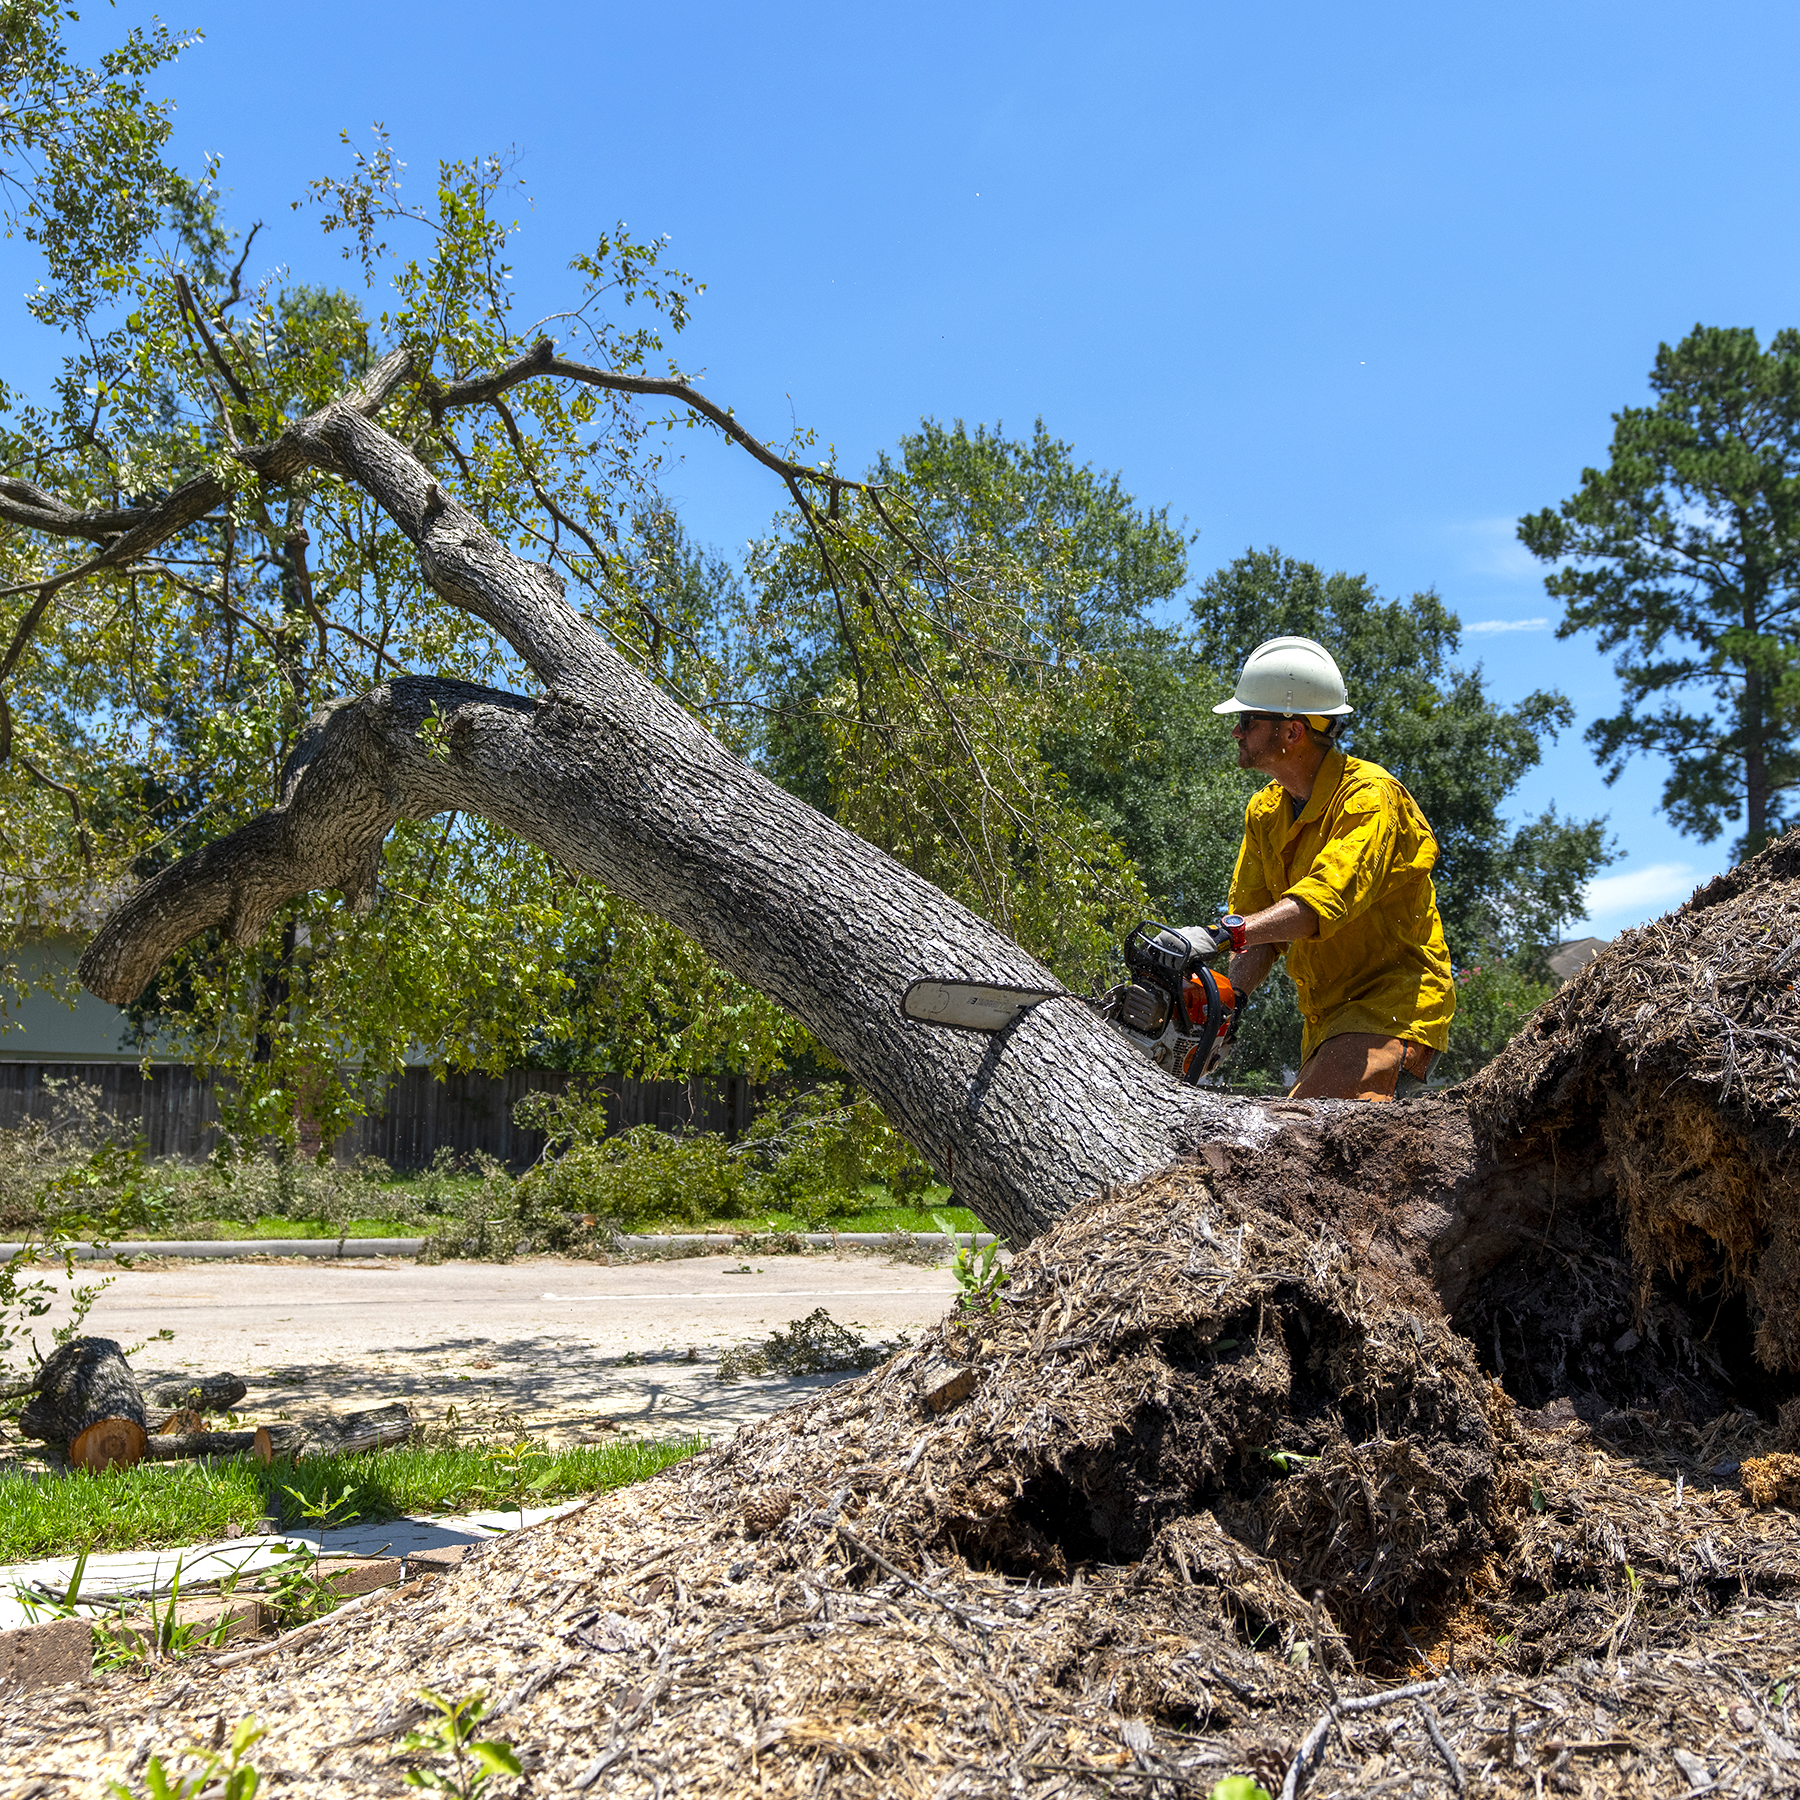 In the aftermath of Hurricane Beryl, Texas A&amp;M Forest Service conducted an initial assessment of the storm's impact. As a result of tree damage and personnel resource allocation, the W.G. Jones State Forest has been temporarily closed.